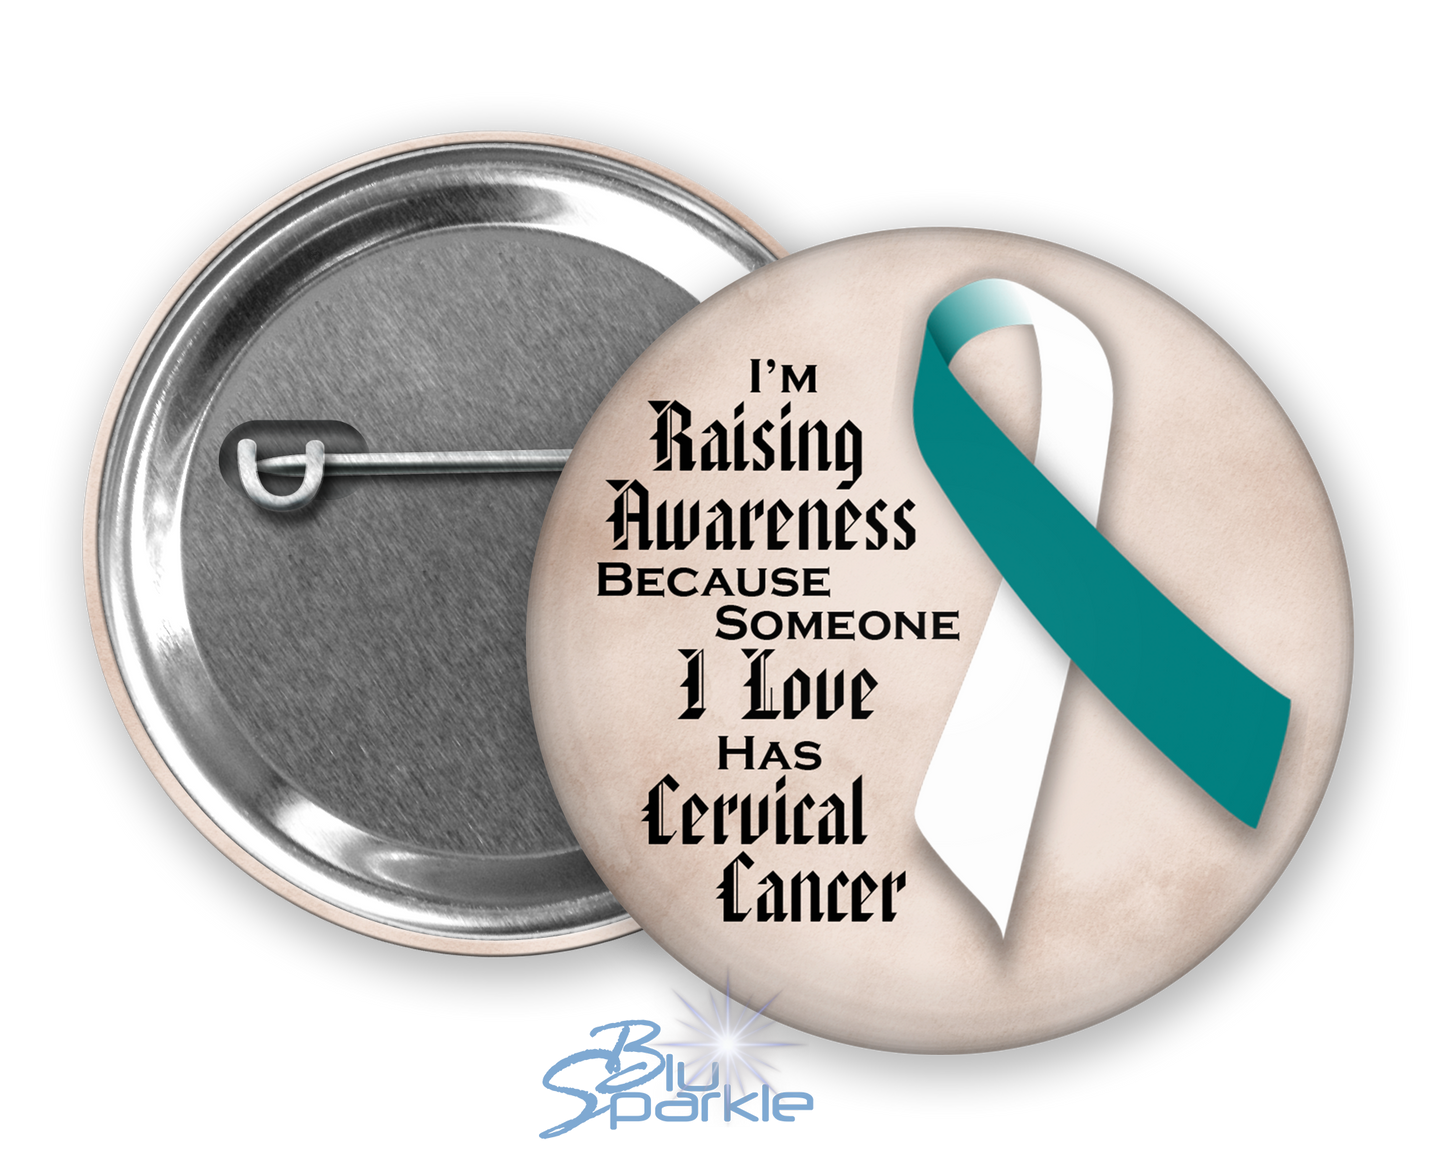 I'm Raising Awareness Because Someone I Love Died From (Has, Survived) Cervical Cancer Pinback Button |x|